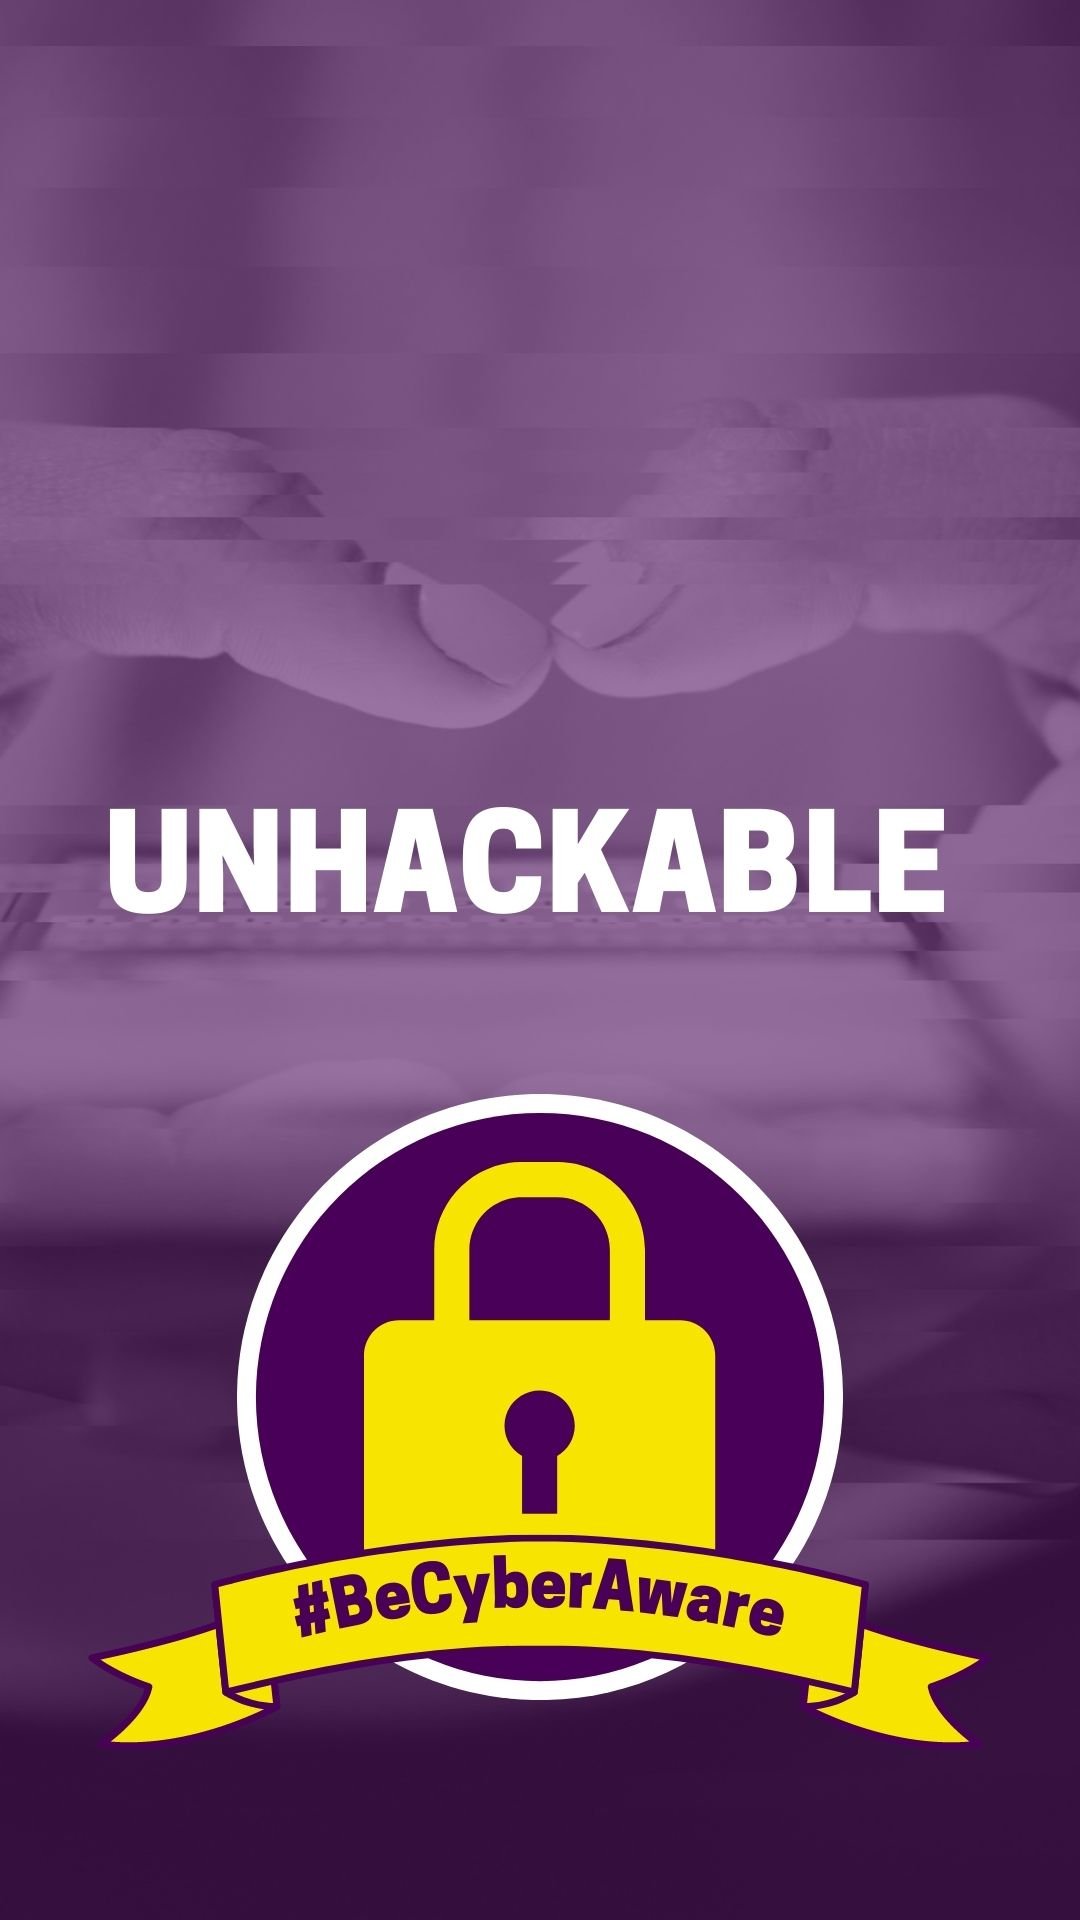 Photo of phone, glitch effect, BeCyberAware graphic, lock screen graphic, text "unhackable"